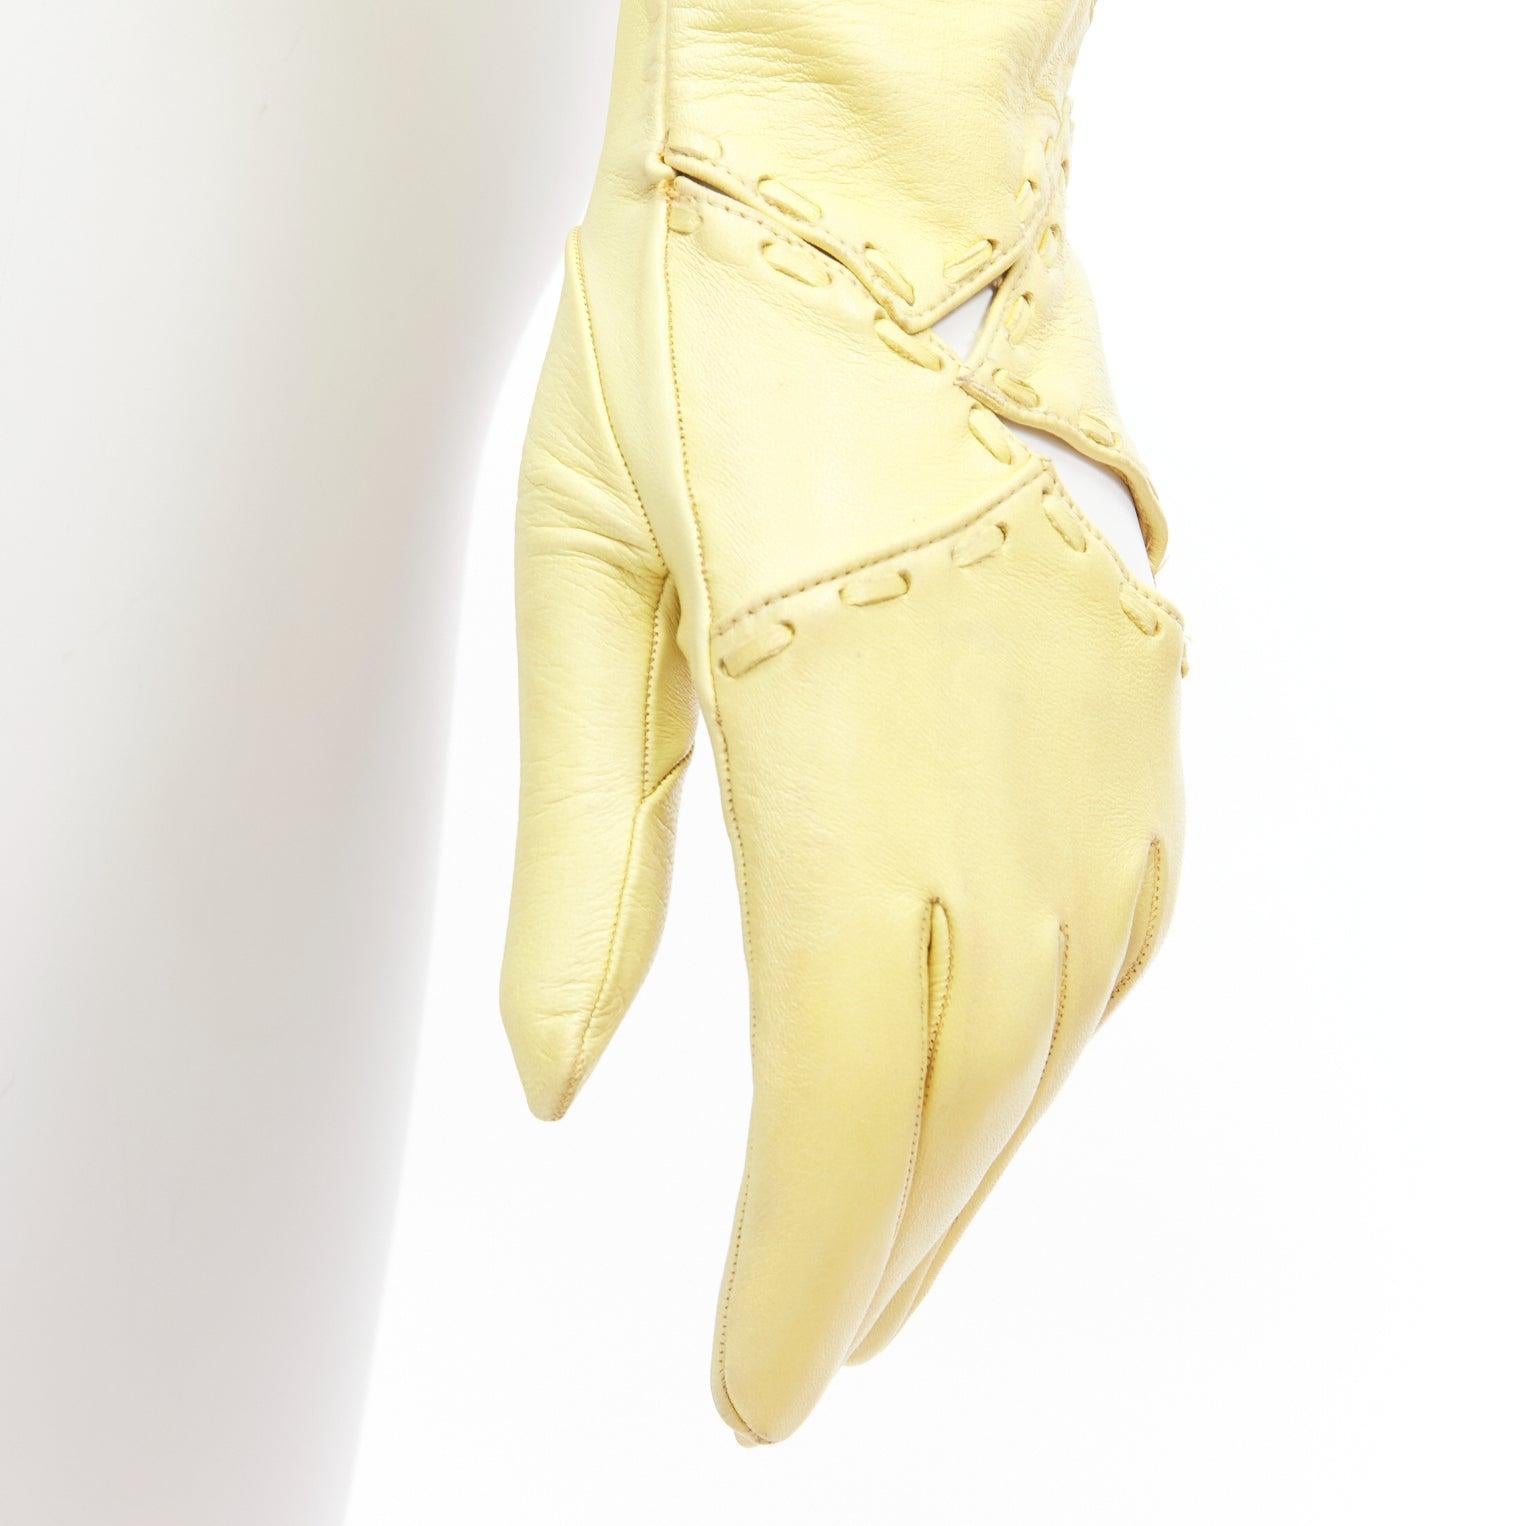 CLAUDE MONTANA Vintage yellow leather topstitch cut out gloves US7 For Sale 3